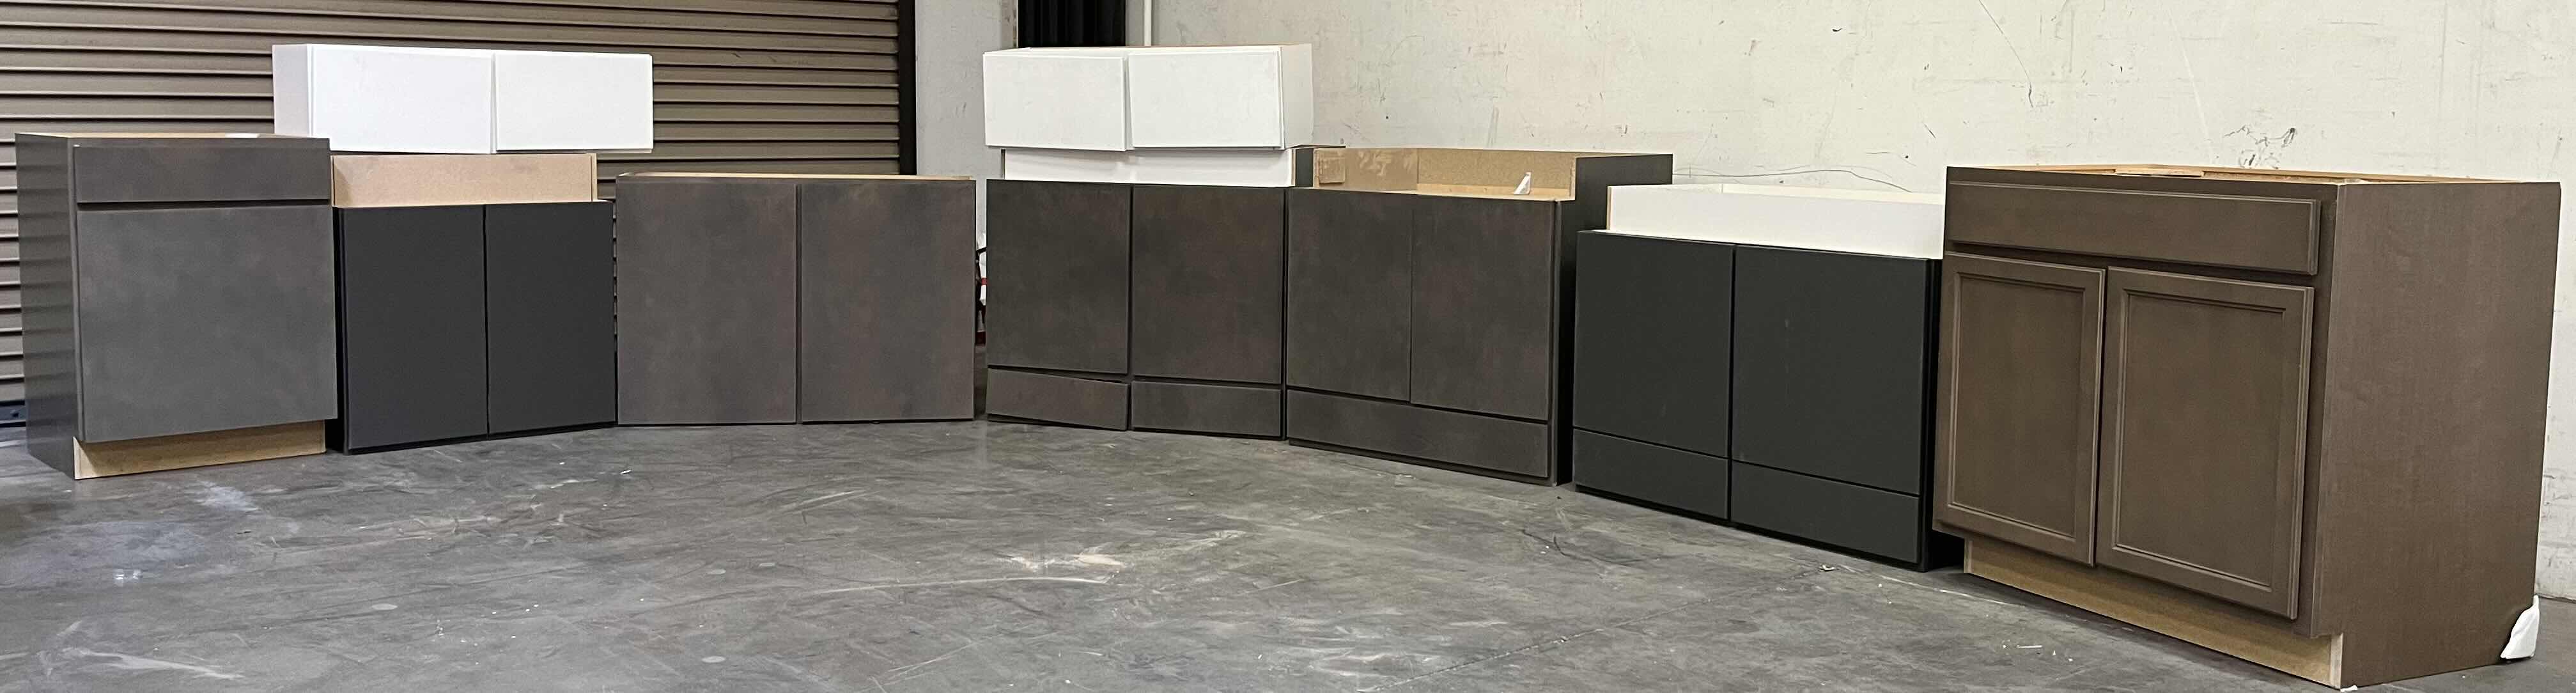 Photo 1 of CABINETS-VARIOUS STYLES, FINISHES, SIZES & PURPOSES (9) READ NOTES